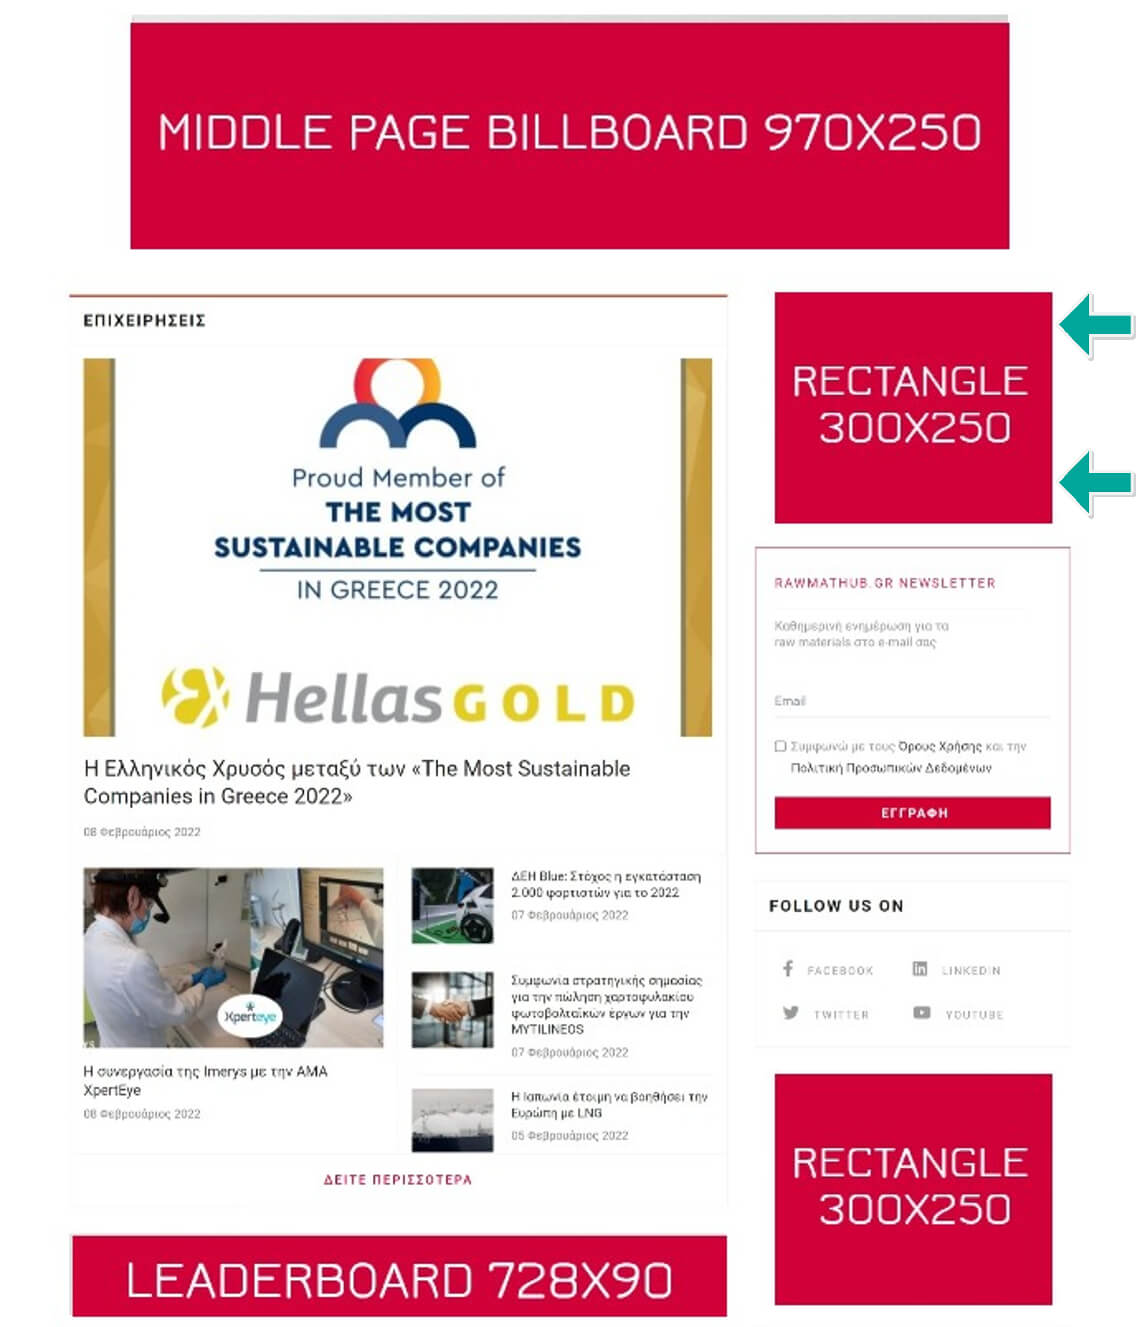 home_page_banner_positions_top_rectangle_300x250.jpg